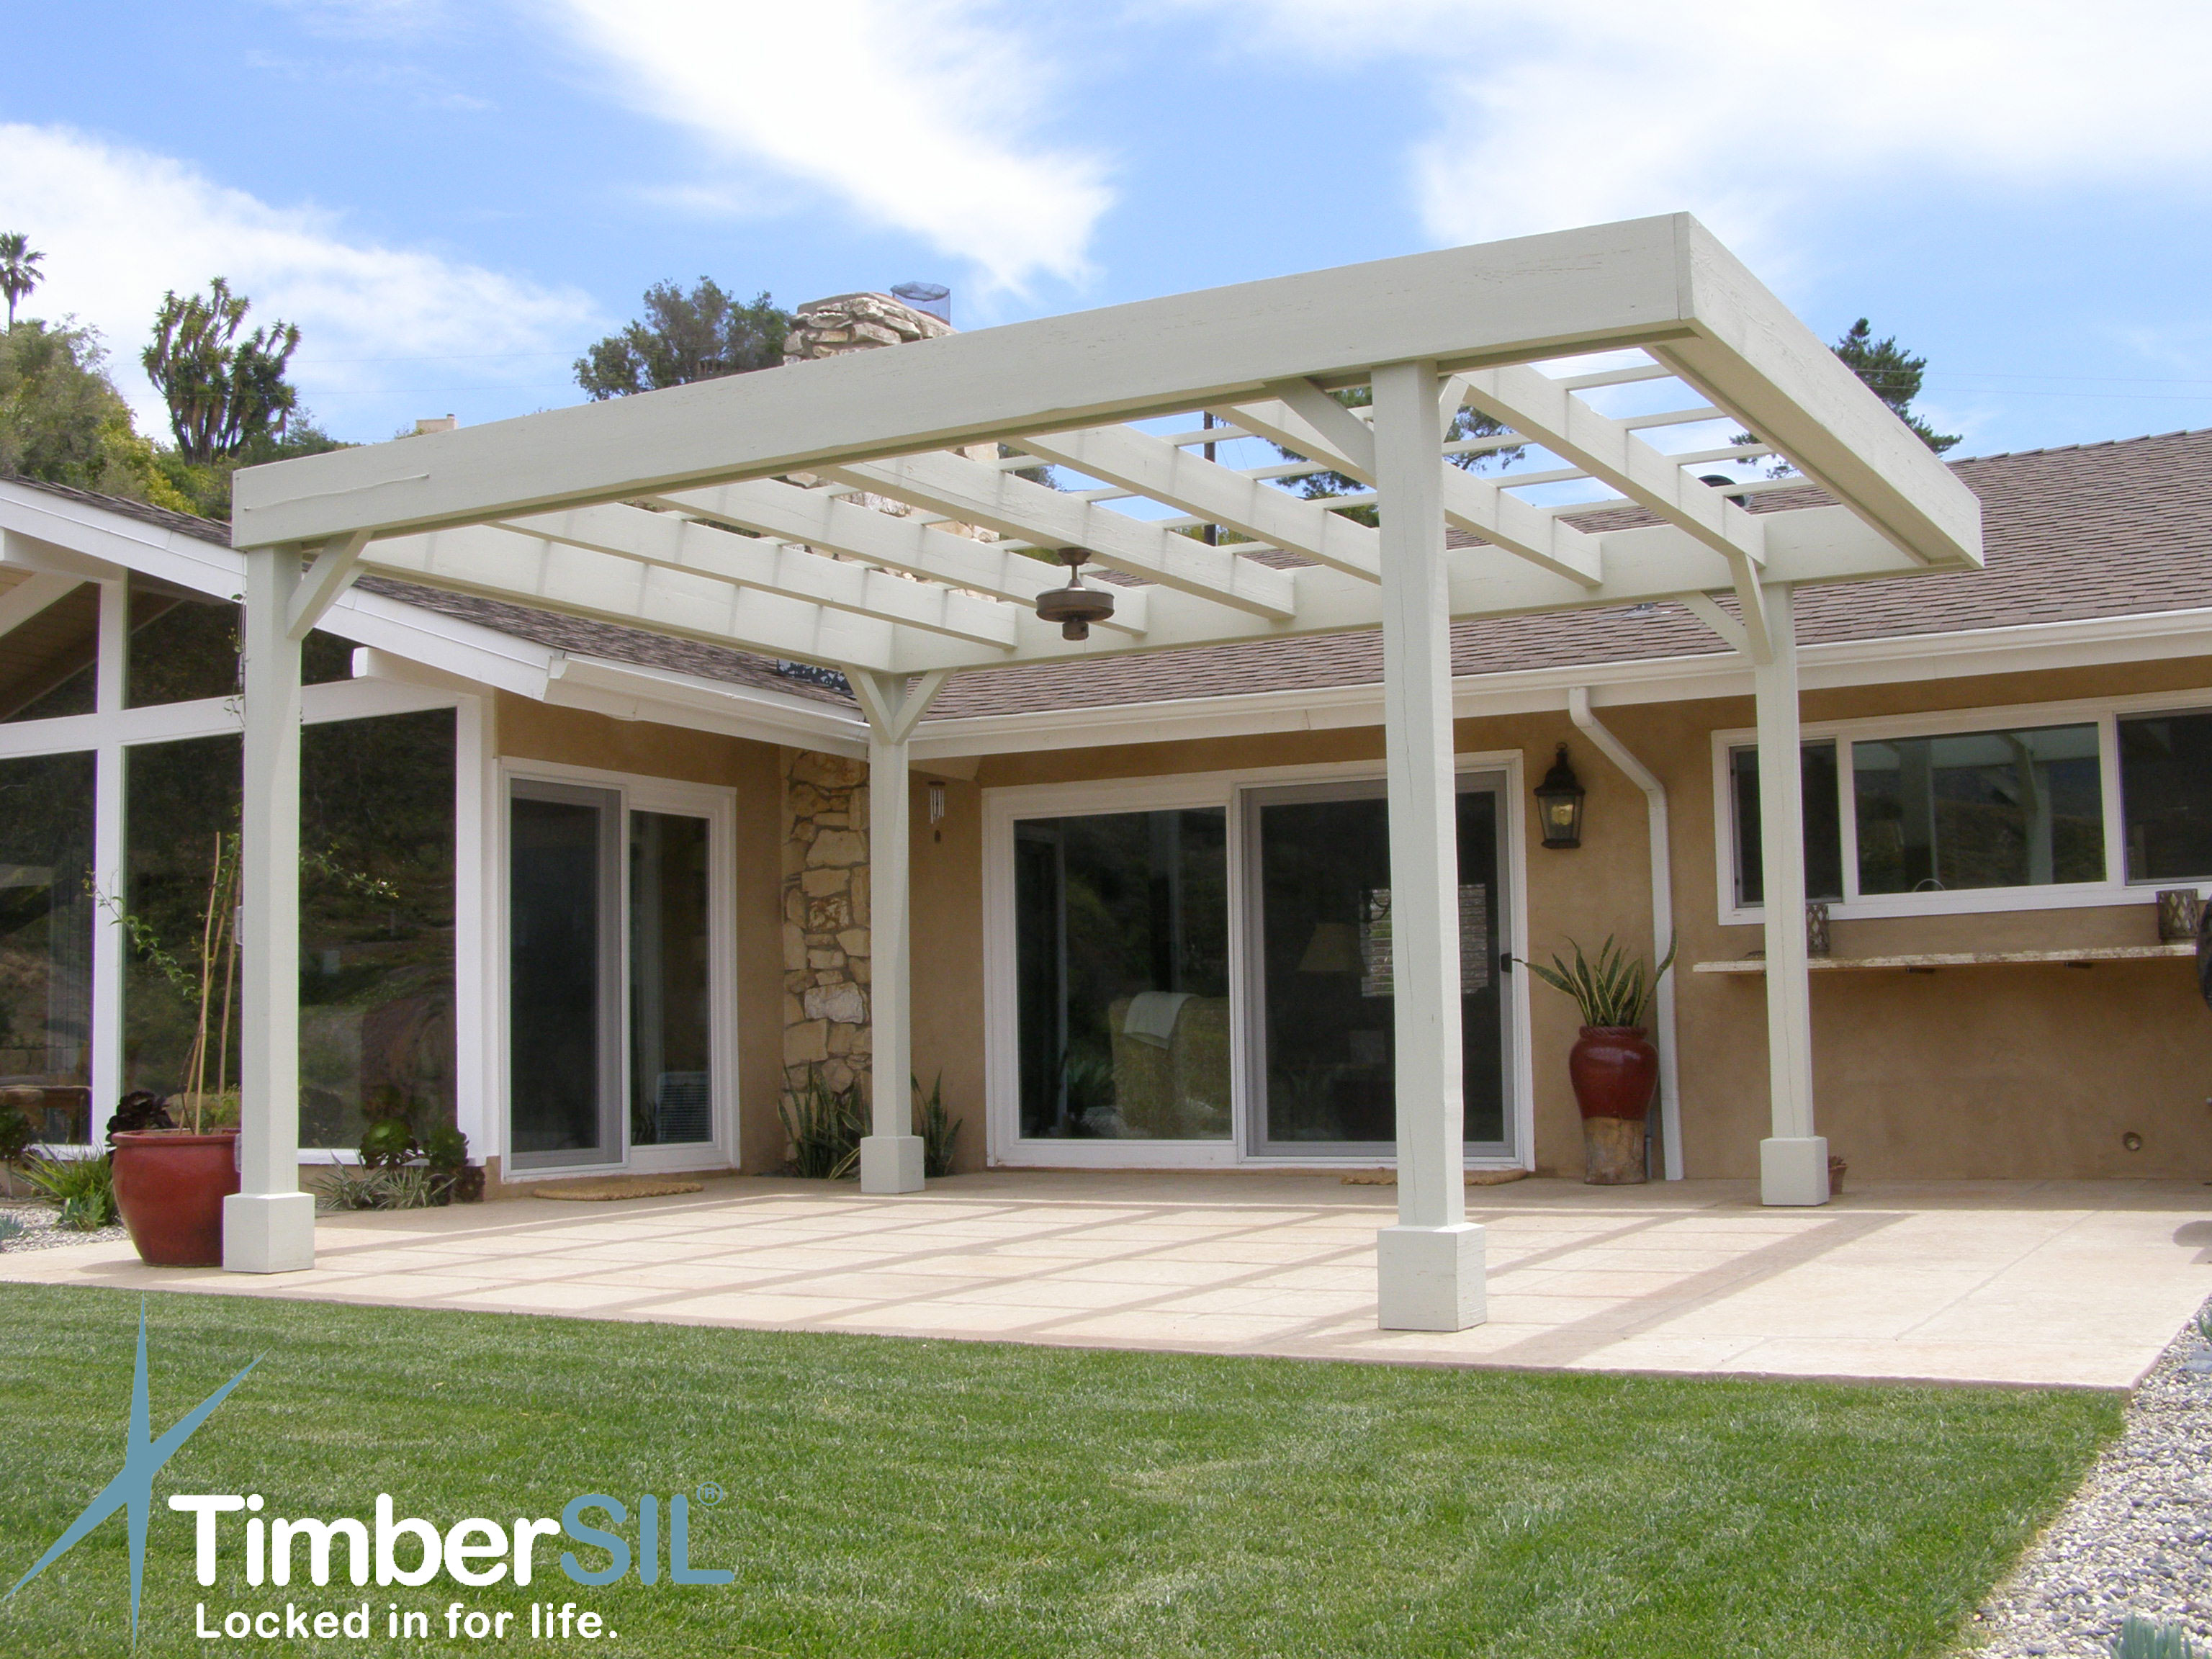 Timber Pergola Designs Woodworking Plans craftsman dining table plans